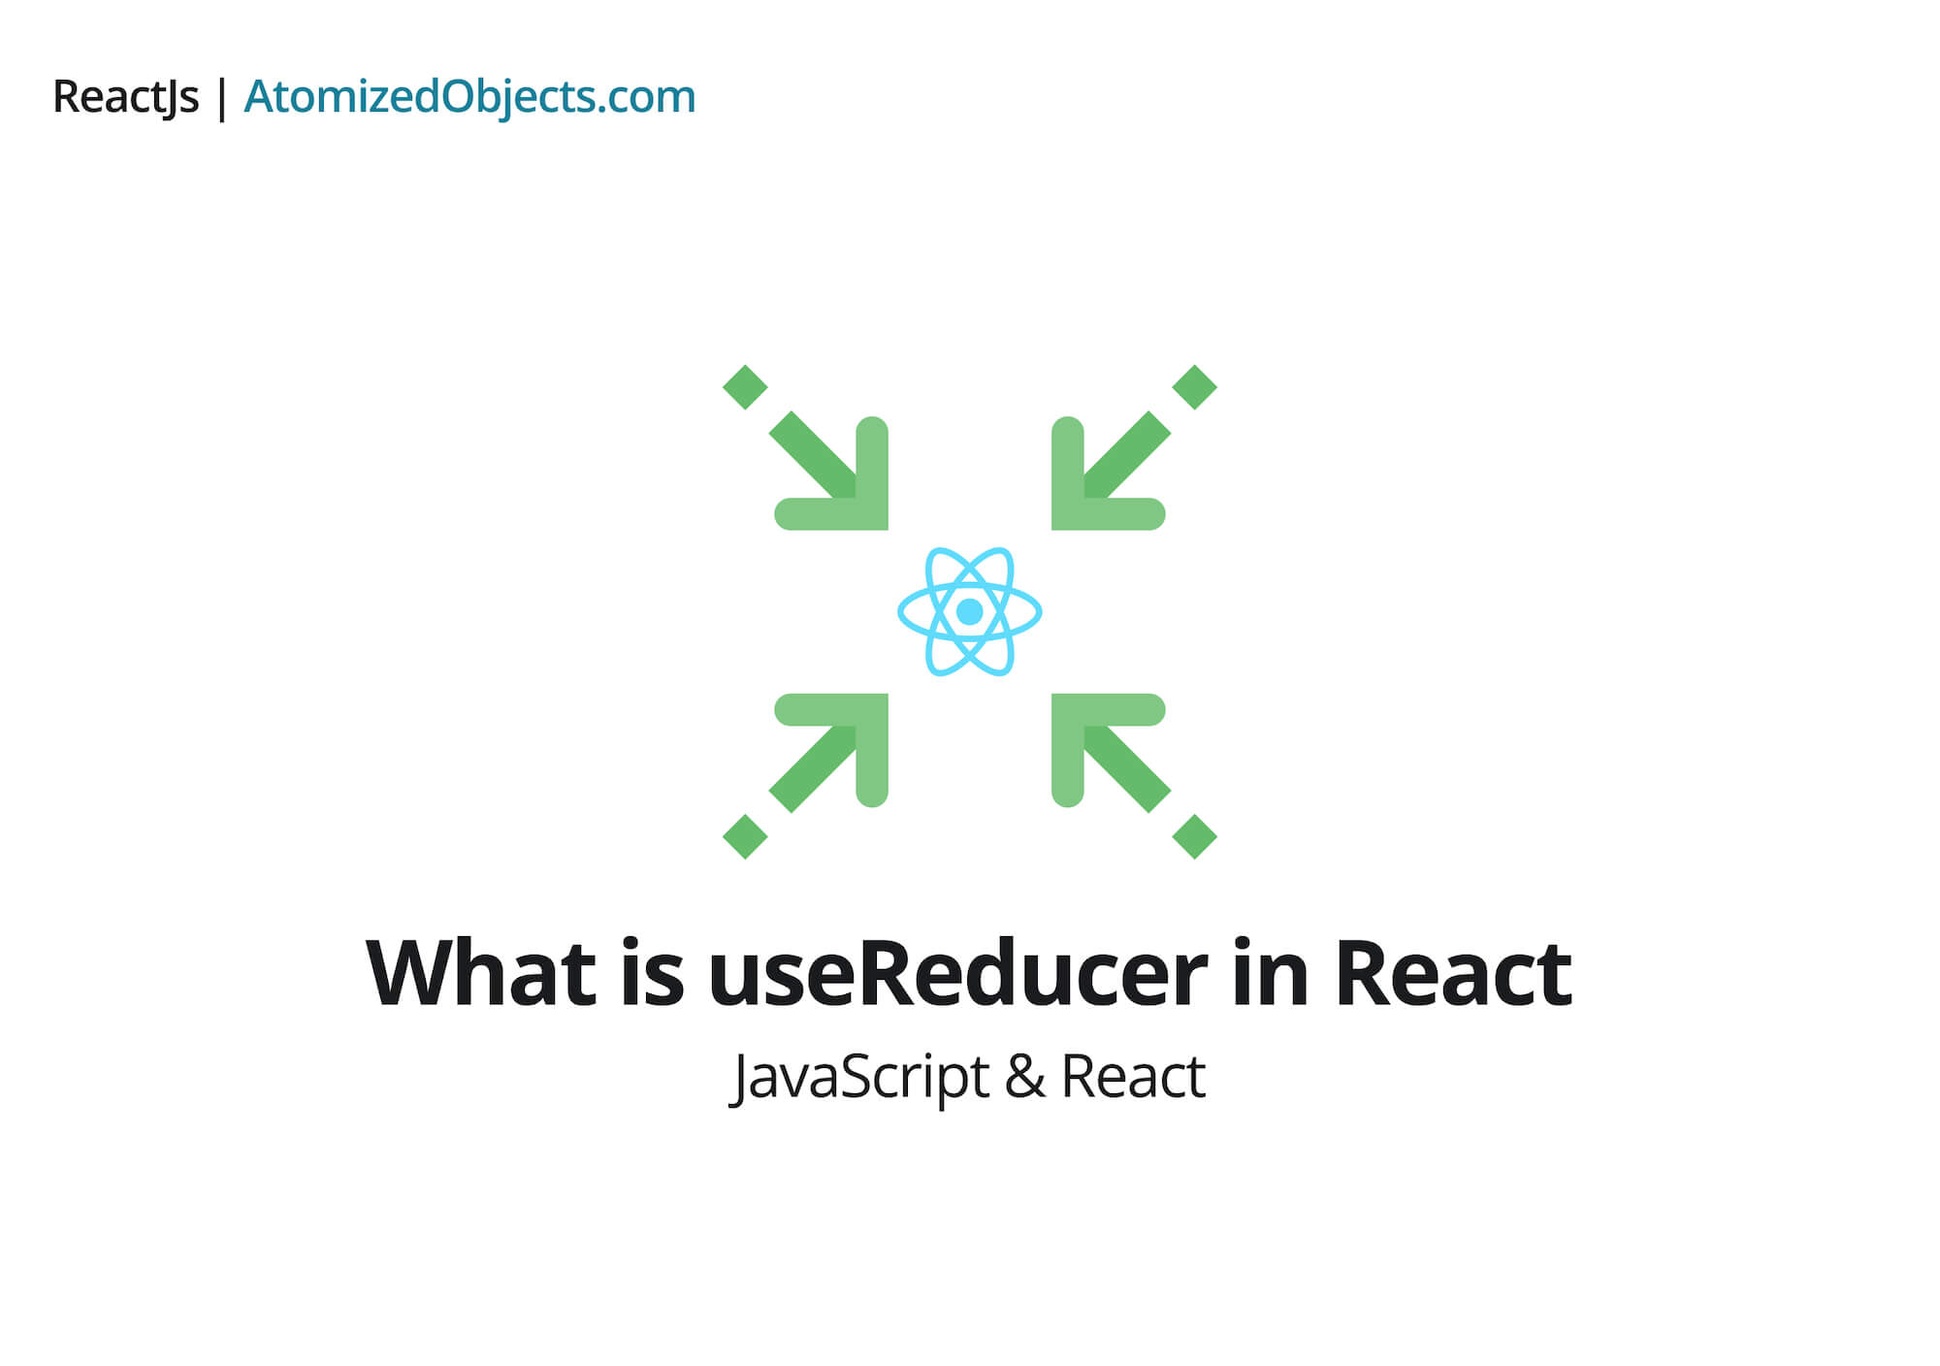 What is useReducer in React